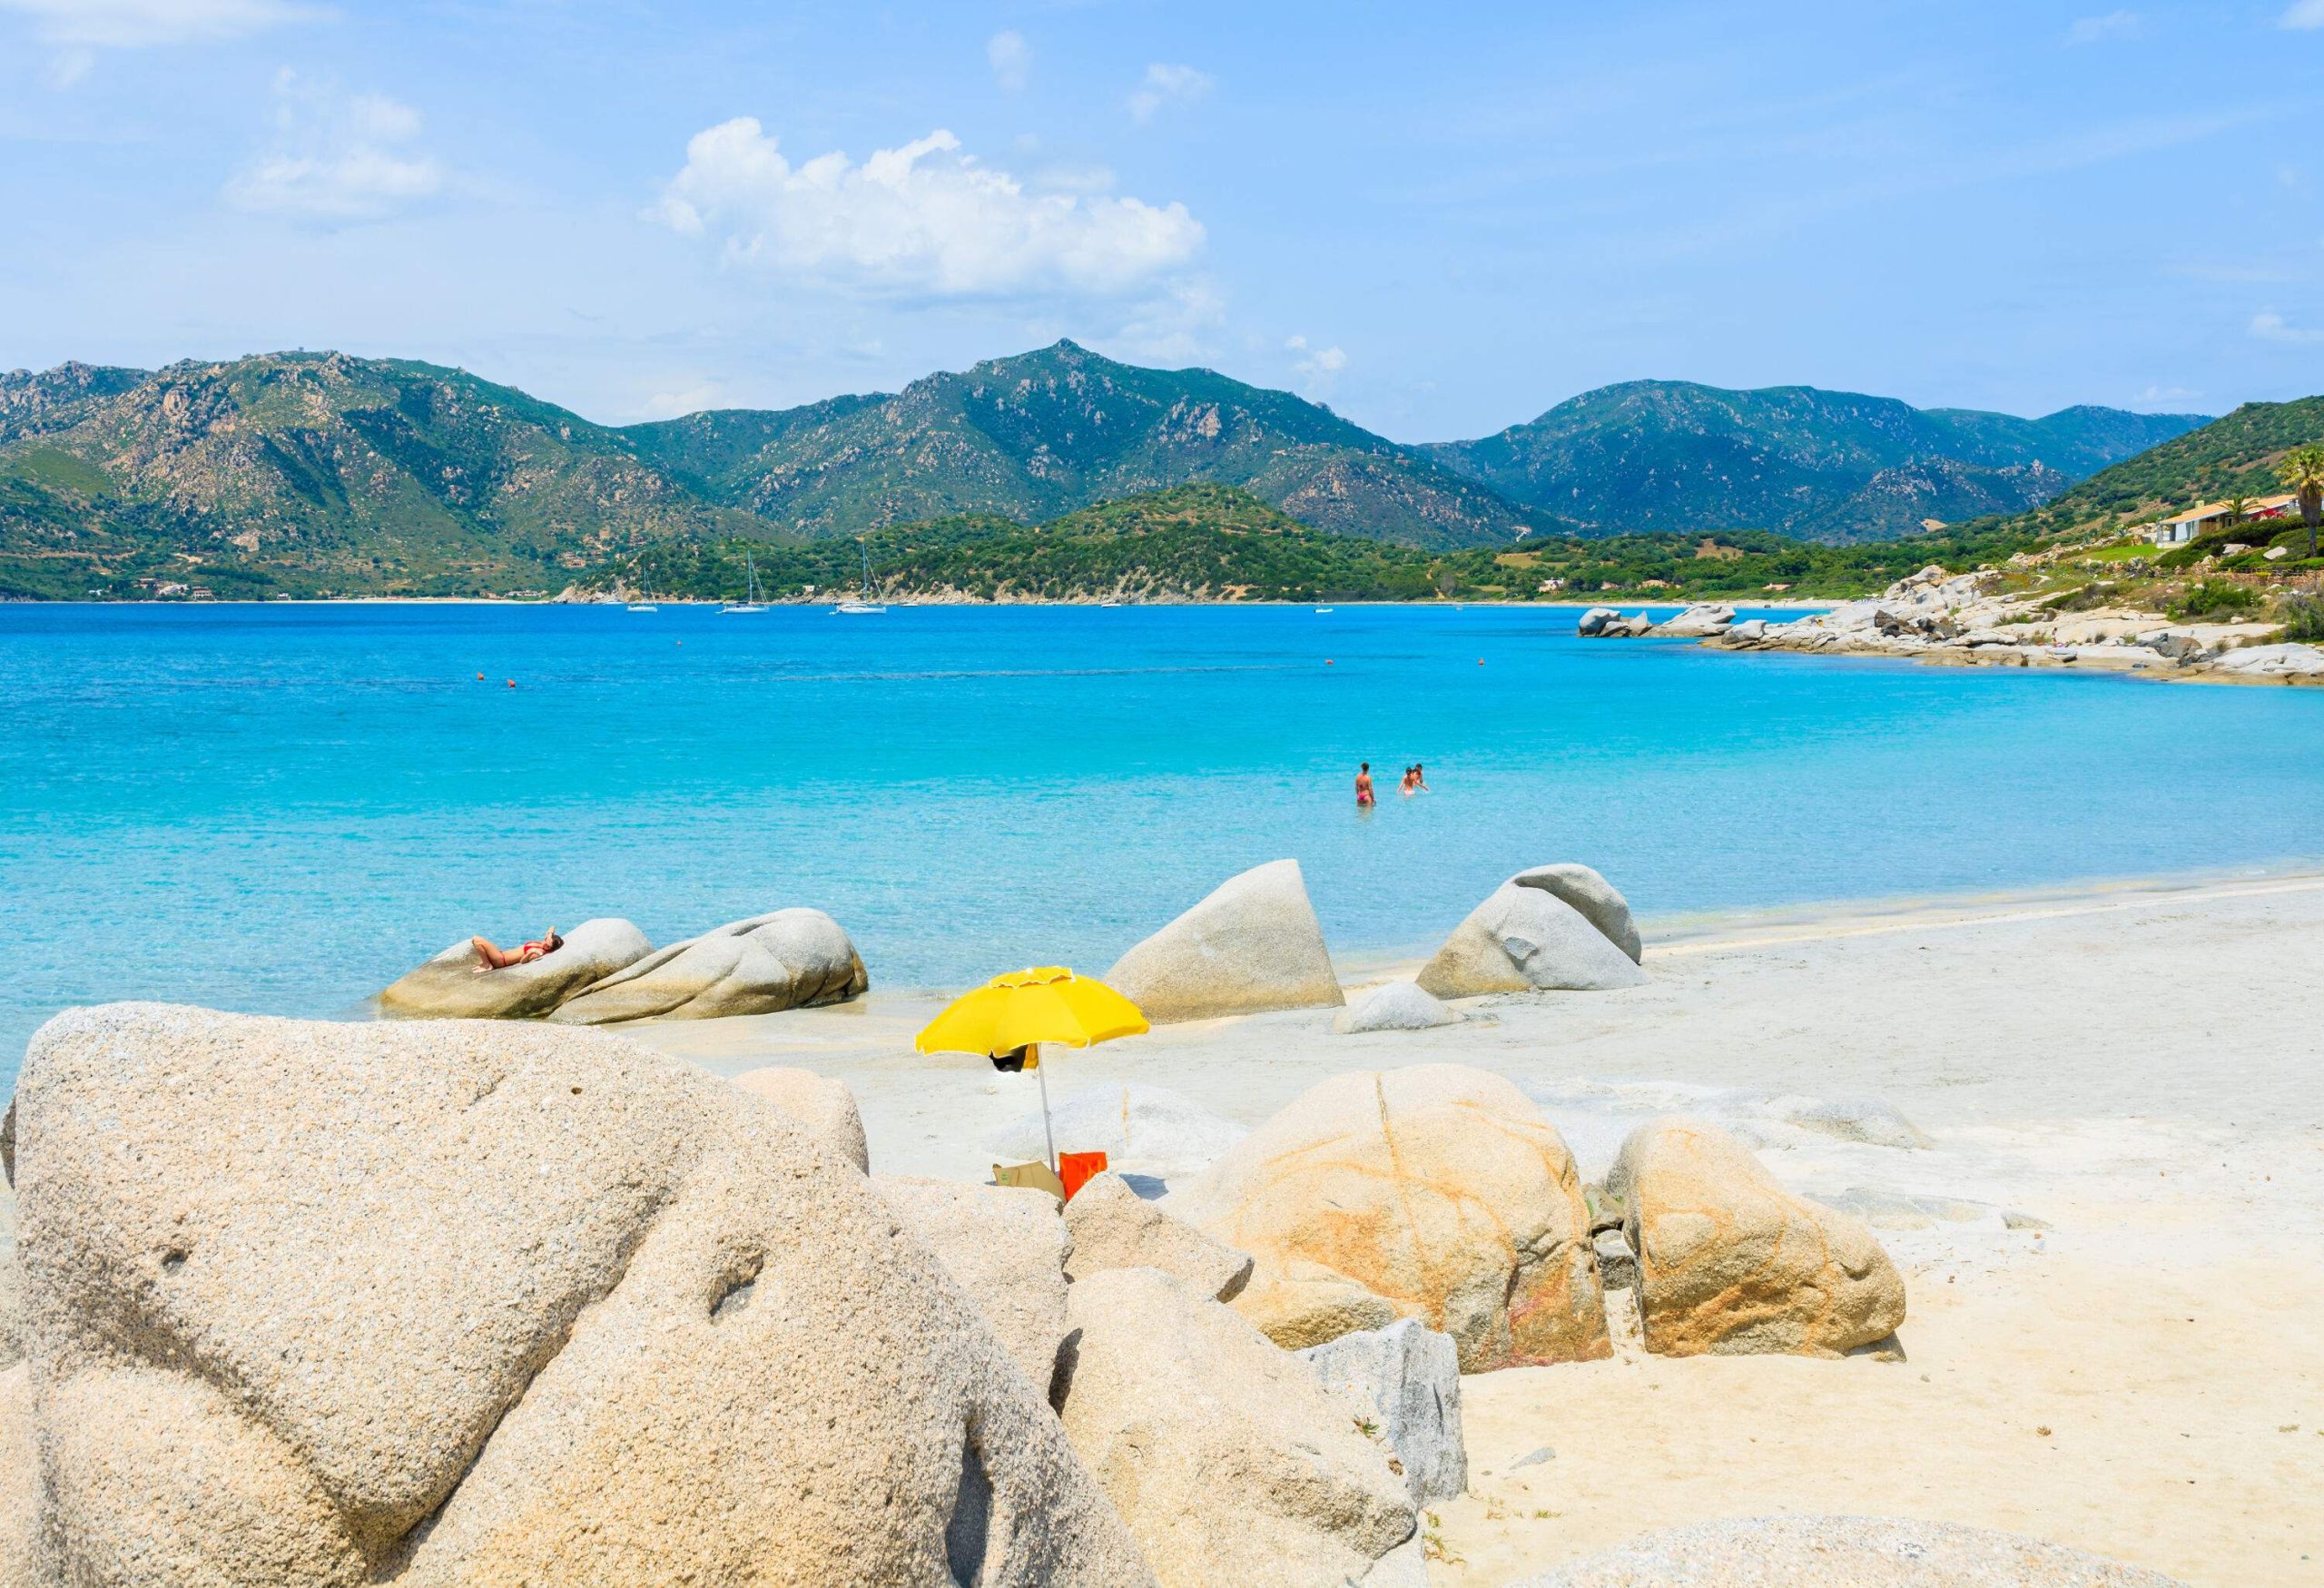 Some visitors enjoy the crystal-clear turquoise water and rock boulders along the white sand beach.